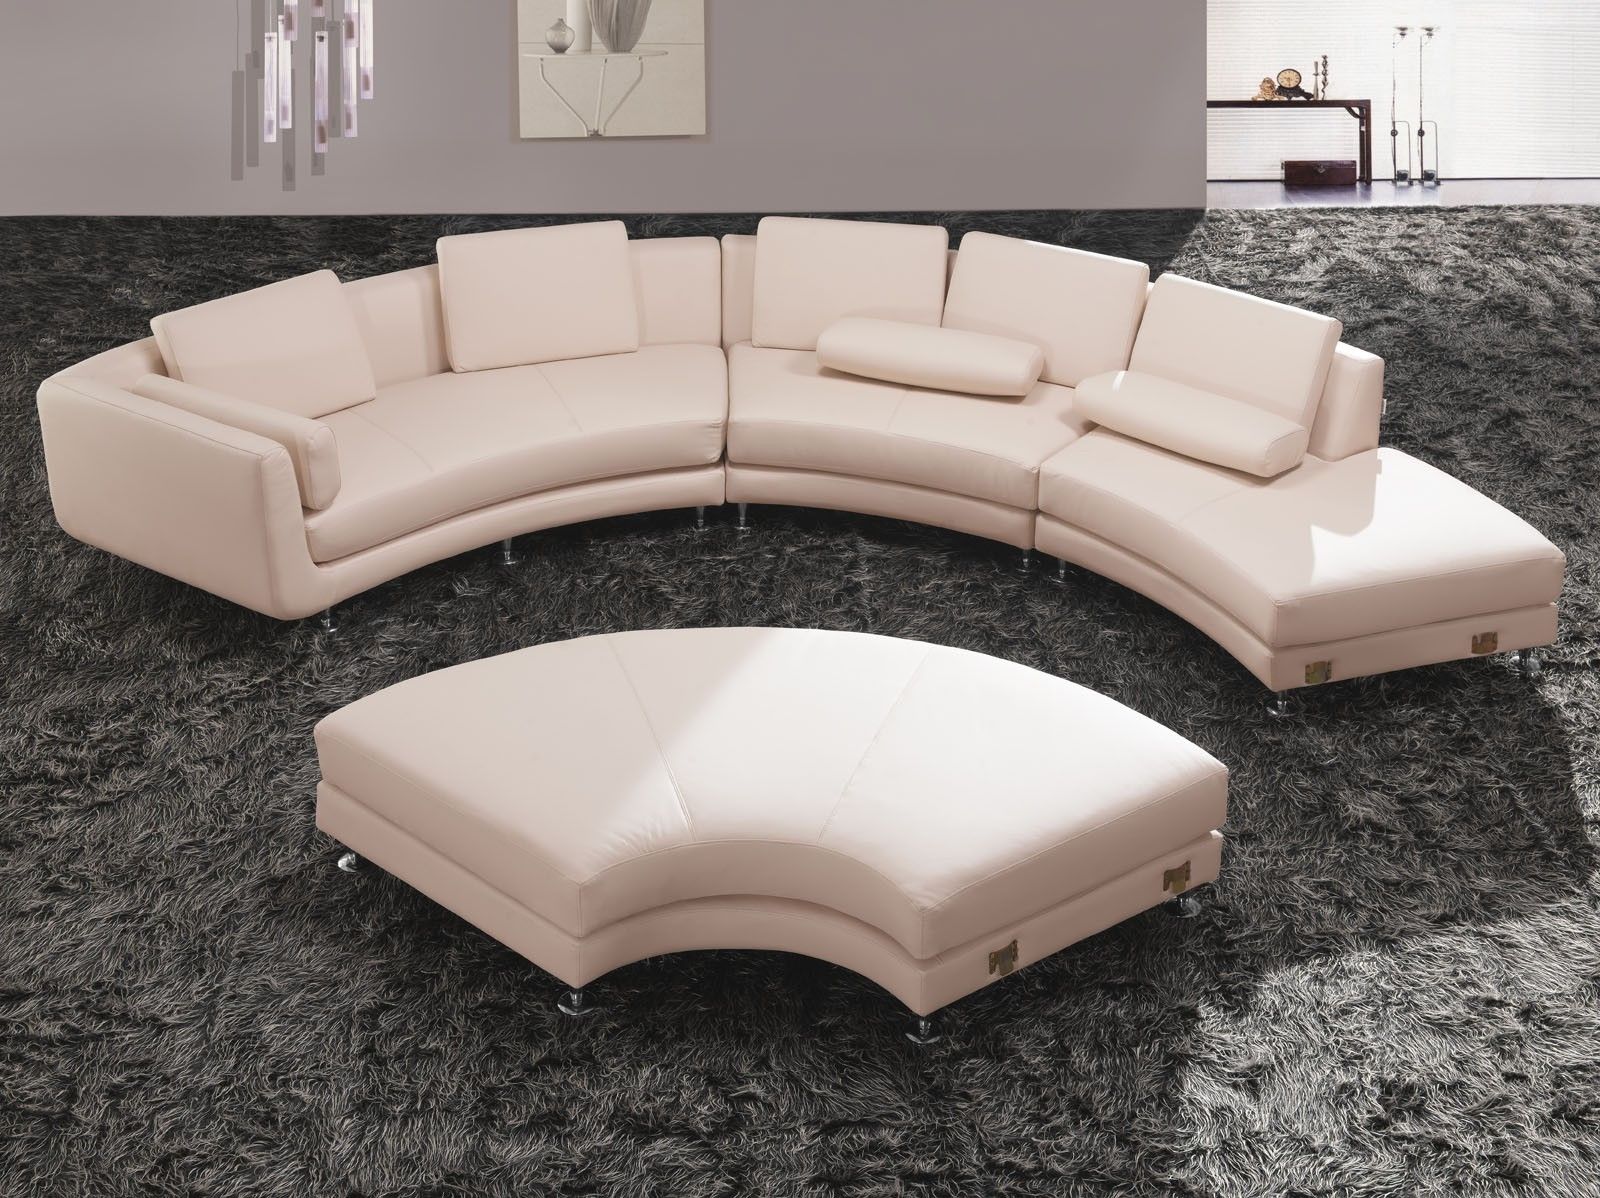 Sofa : Glamorous Round Sectional Sofa Bed Curved Leather Tufted Intended For Round Sectional Sofas (View 5 of 10)